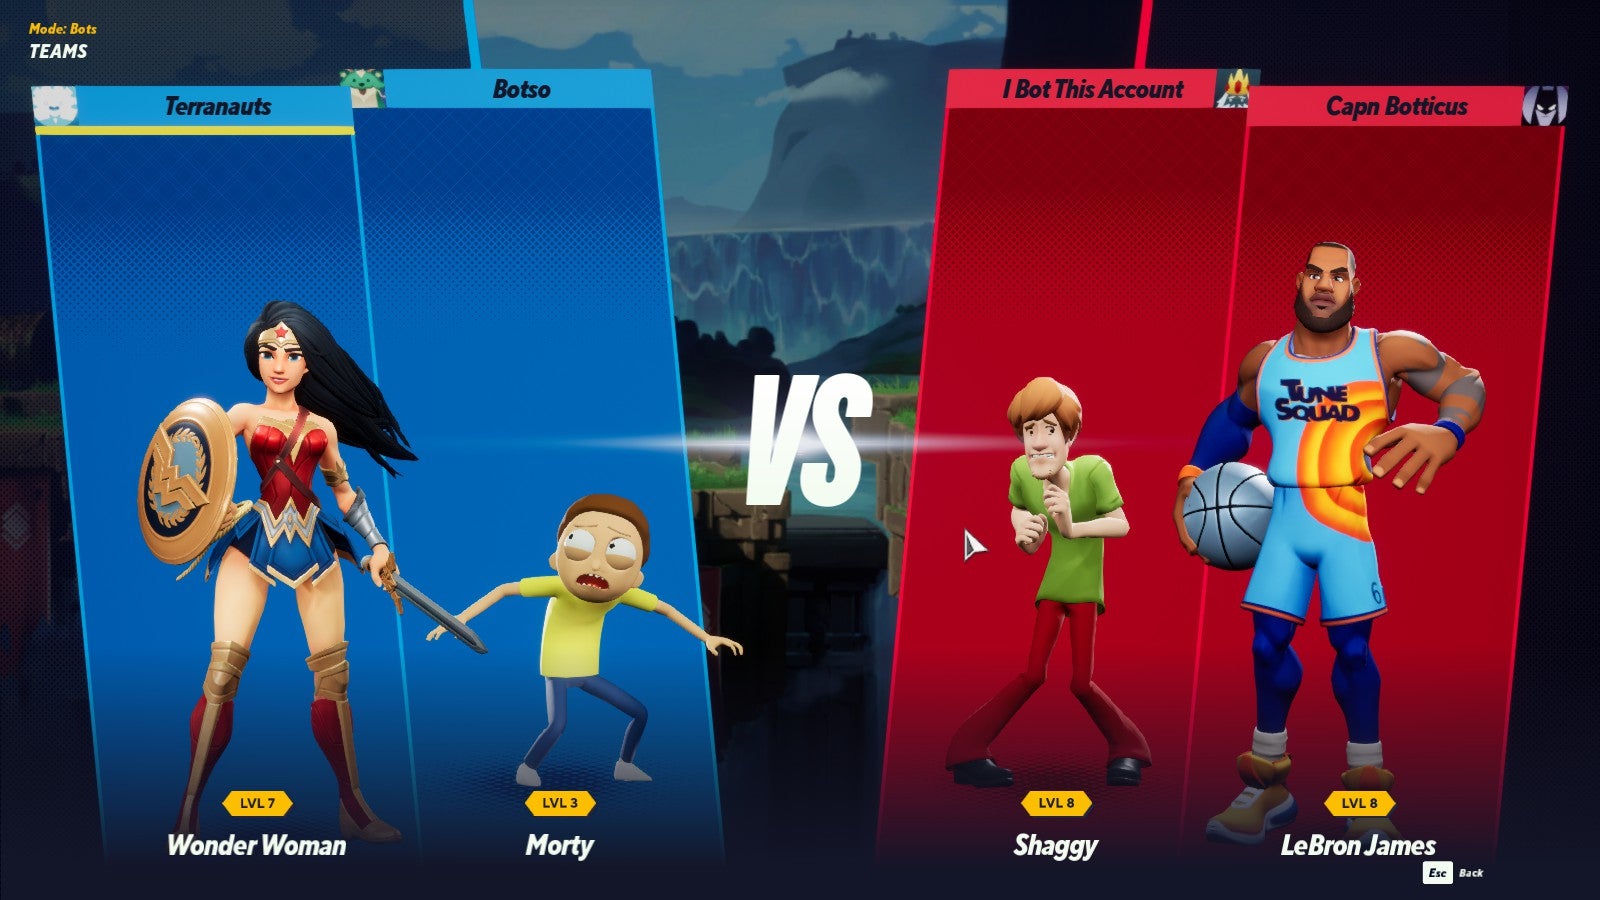 Multiversus review - match loading screen showing Wonder Woman and Morty vs Shaggy and LeBron James